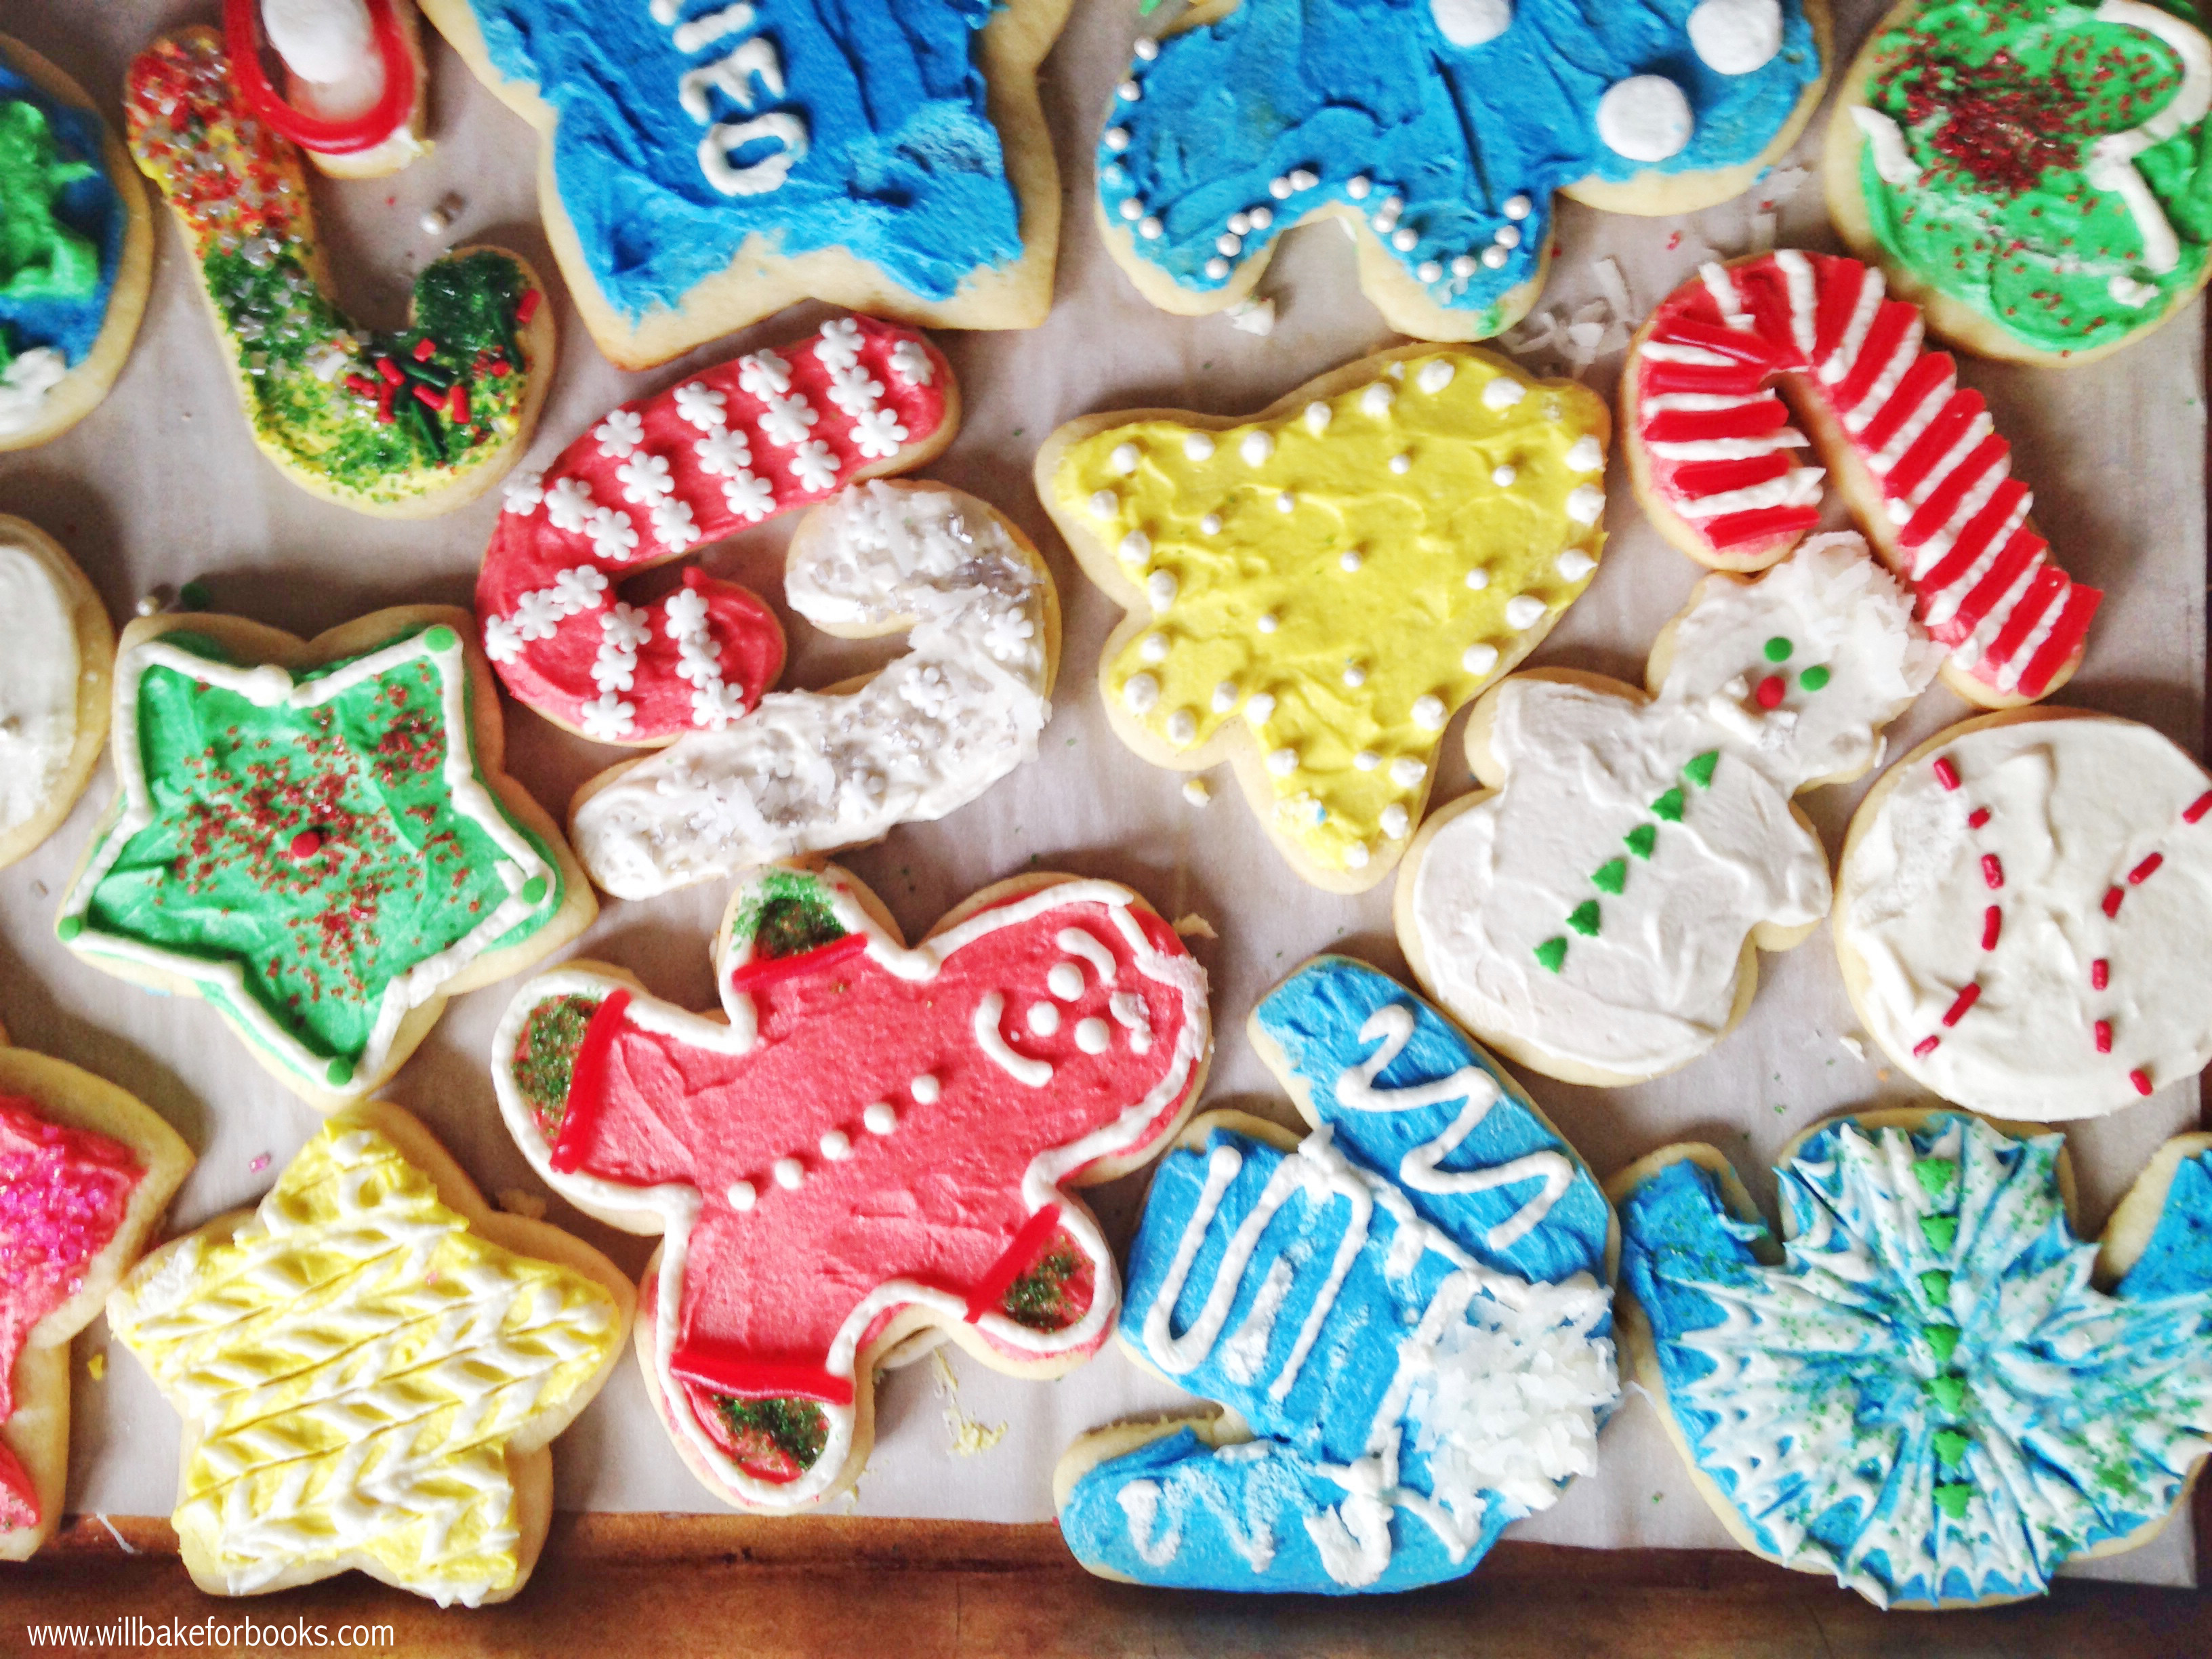 Best Christmas Sugar Cookies
 The Best Christmas Sugar Cookies Will Bake for Books